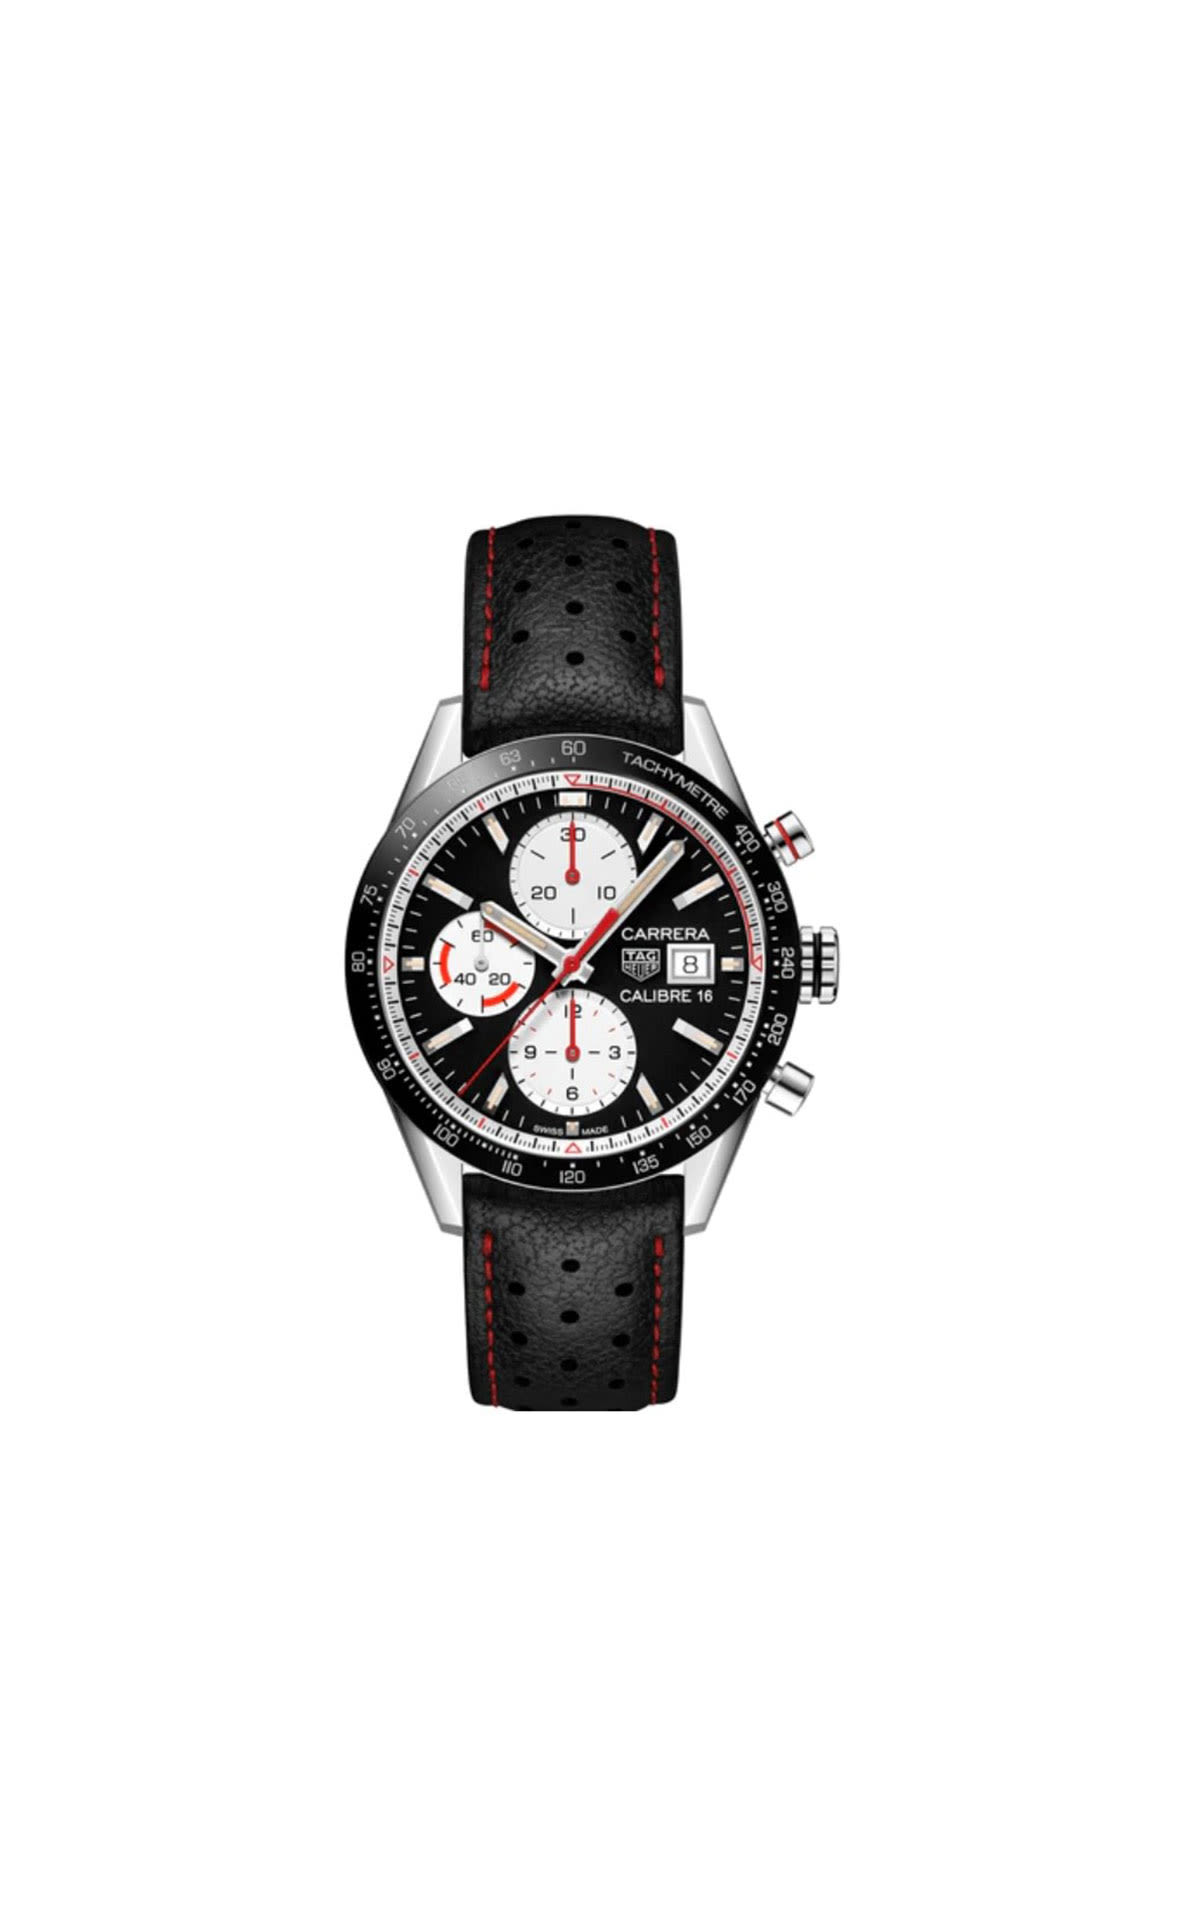 Tag Heuer Watch carrera calibre 16 from Bicester Village